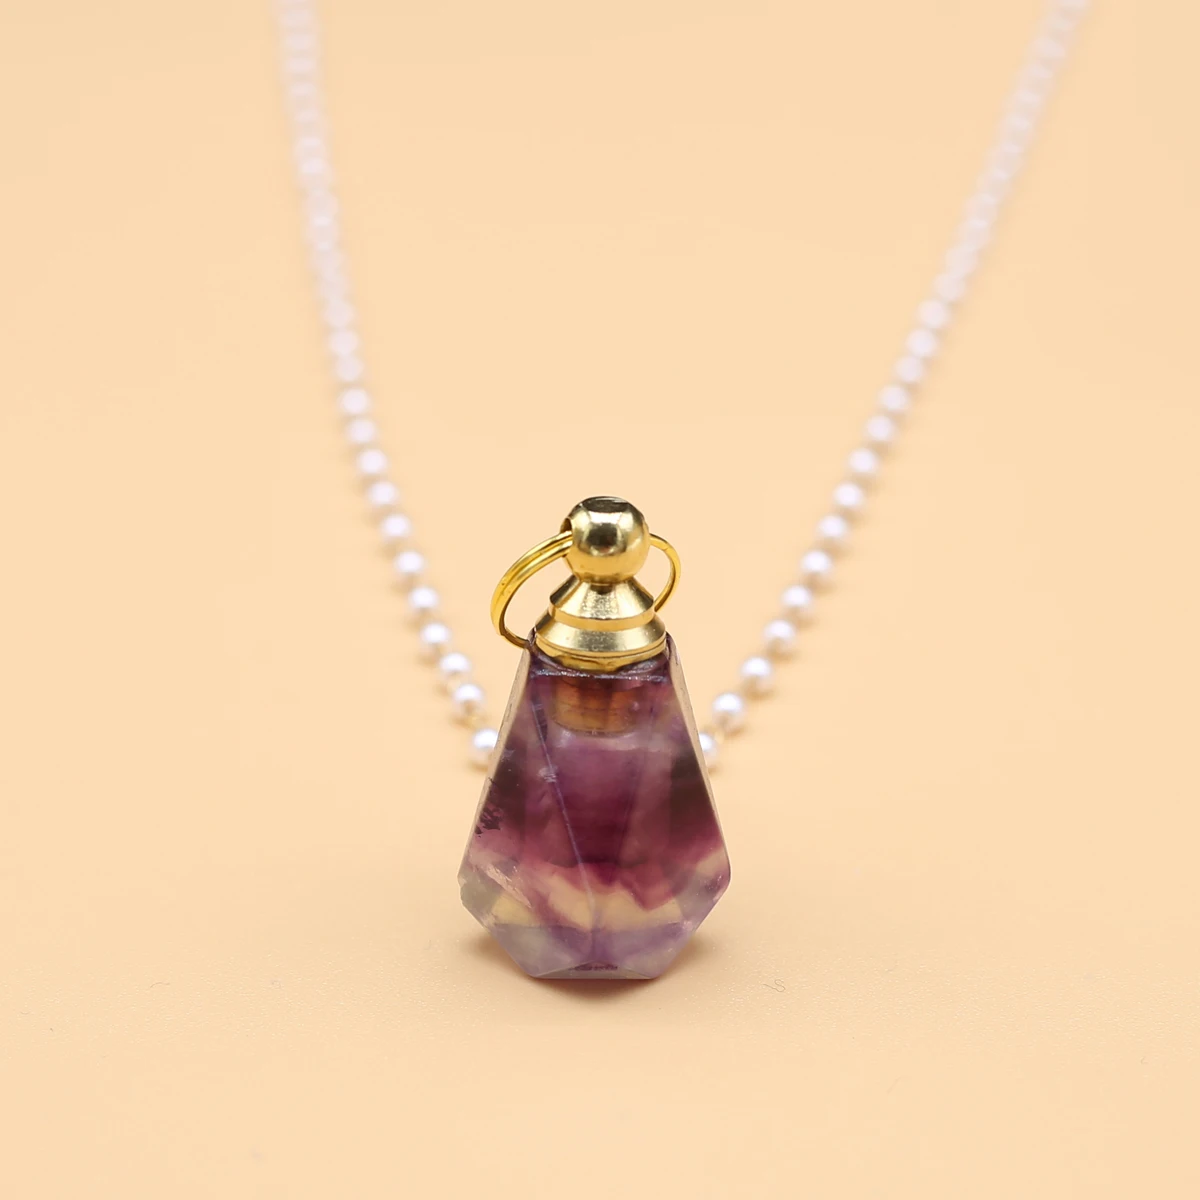 

Natural Fluorite Perfume Bottle Pendant Necklace Stones Essential Oil Diffuser Pearls Chain Necklaces for Women Jewelry 23x33mm